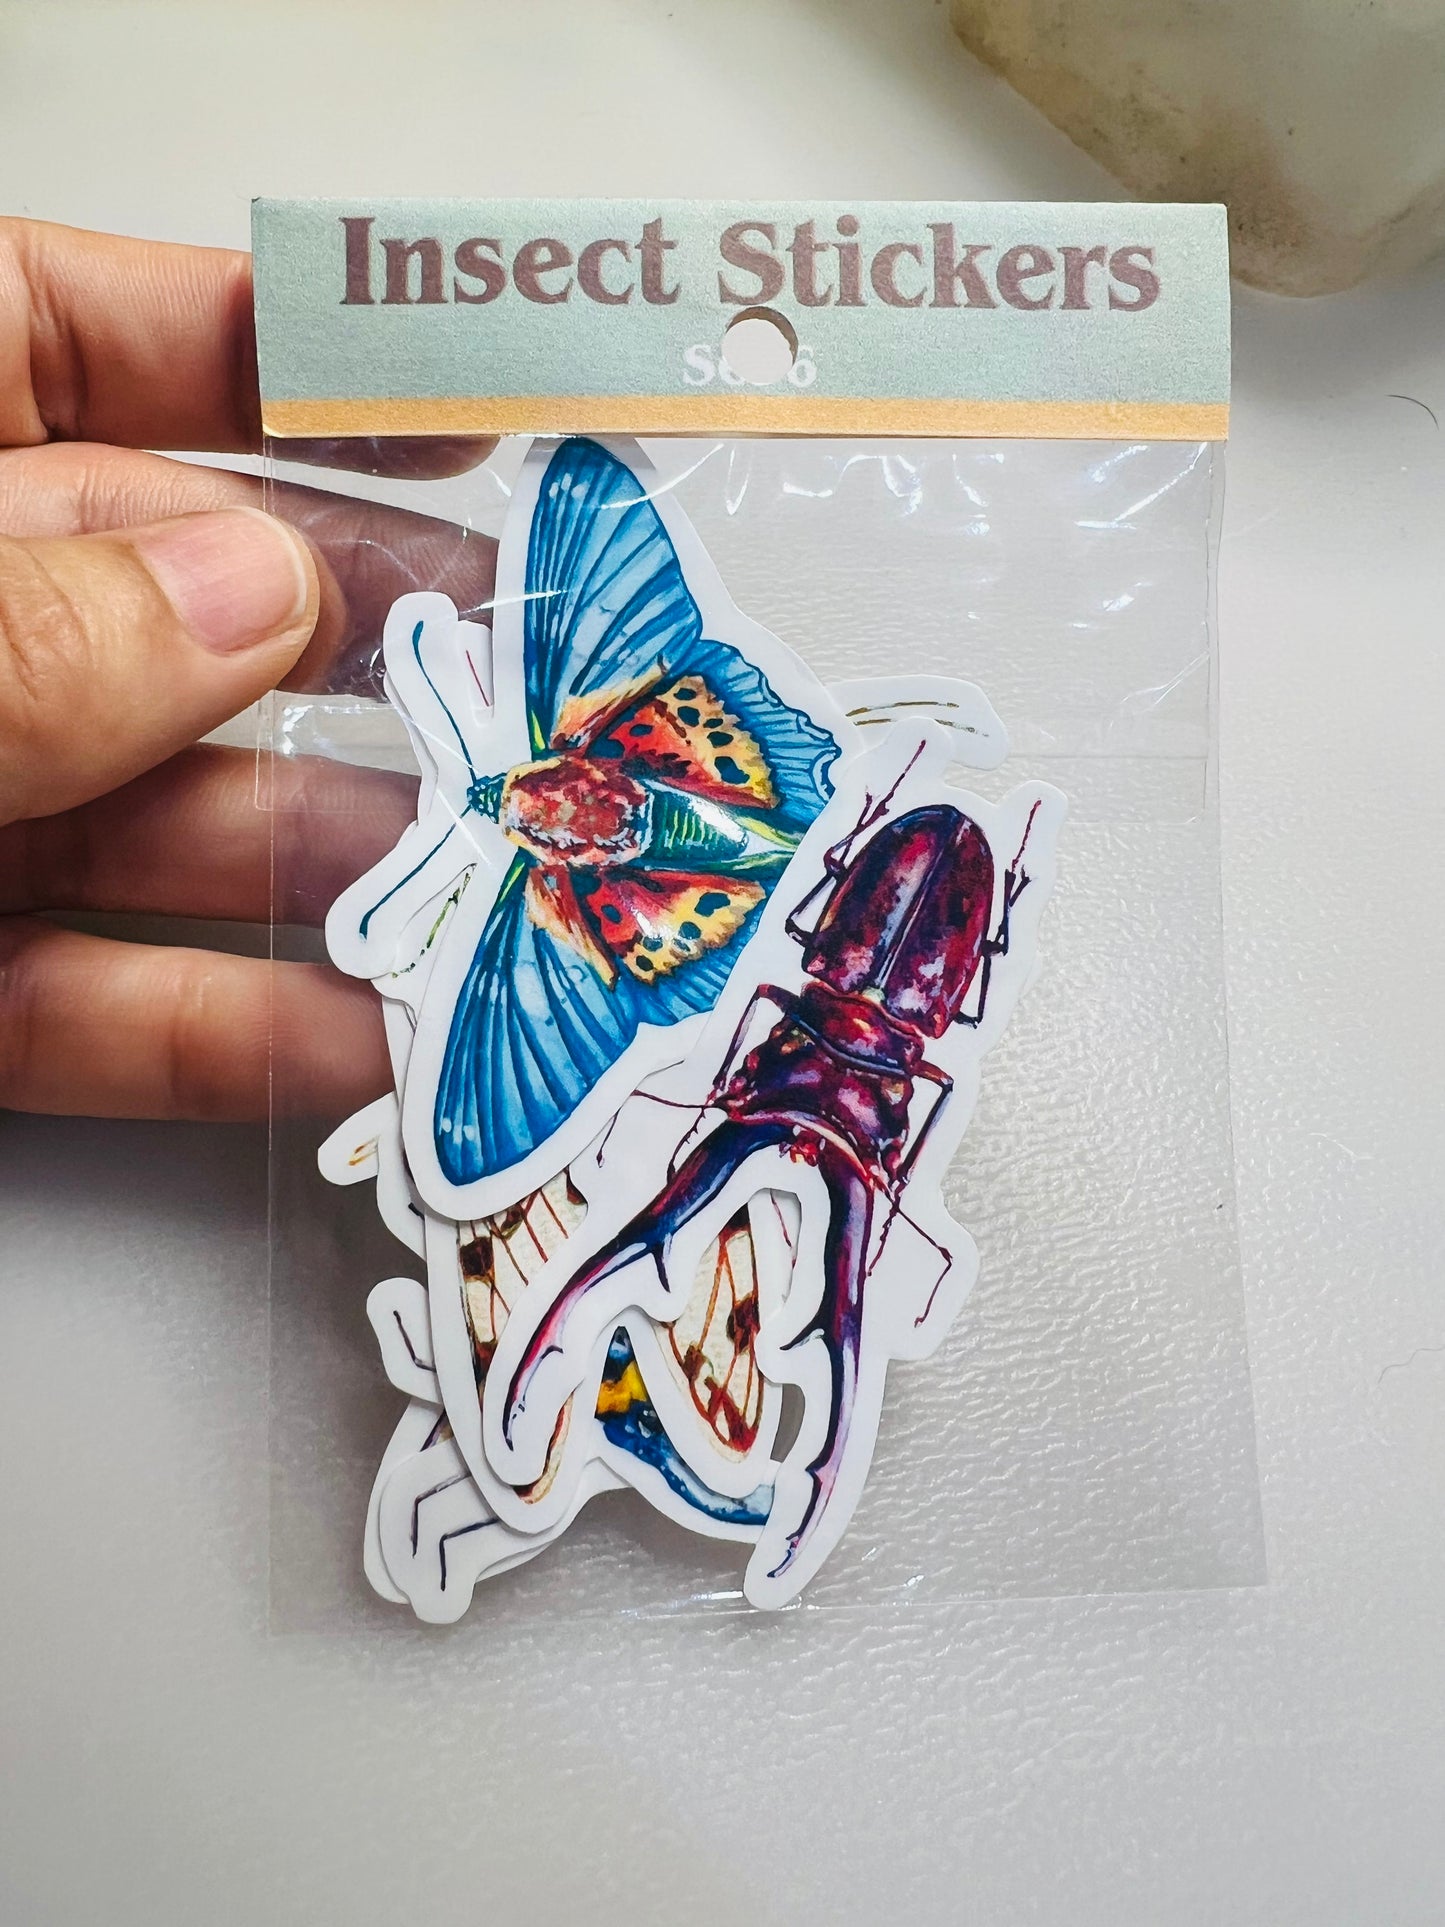 Insect stickers - 8 stickers